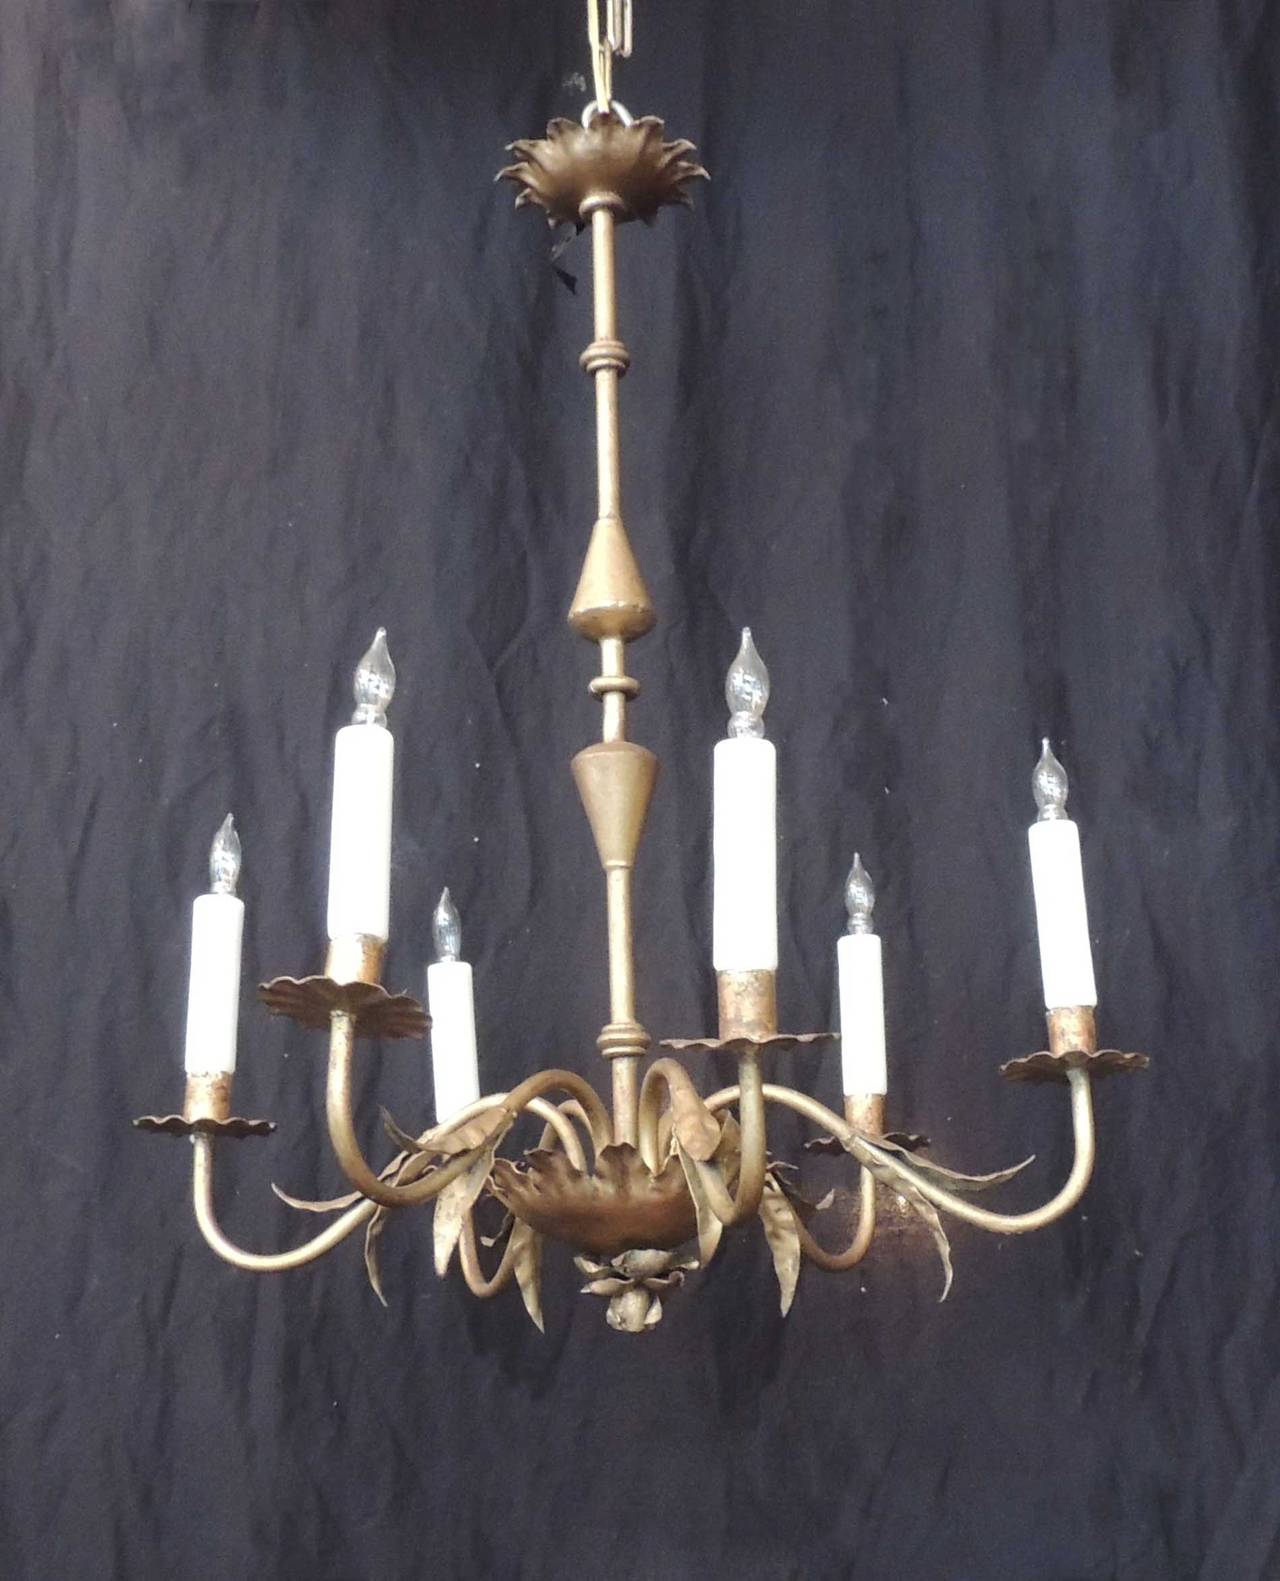 This Barcelona chandelier has a unique stem with six foliate arms, a floral base, and rippled bobeches. The boulbous stem with central ring connects to the floral base with rose petal detail on the bottom canopy. Above the bottom canopy there are